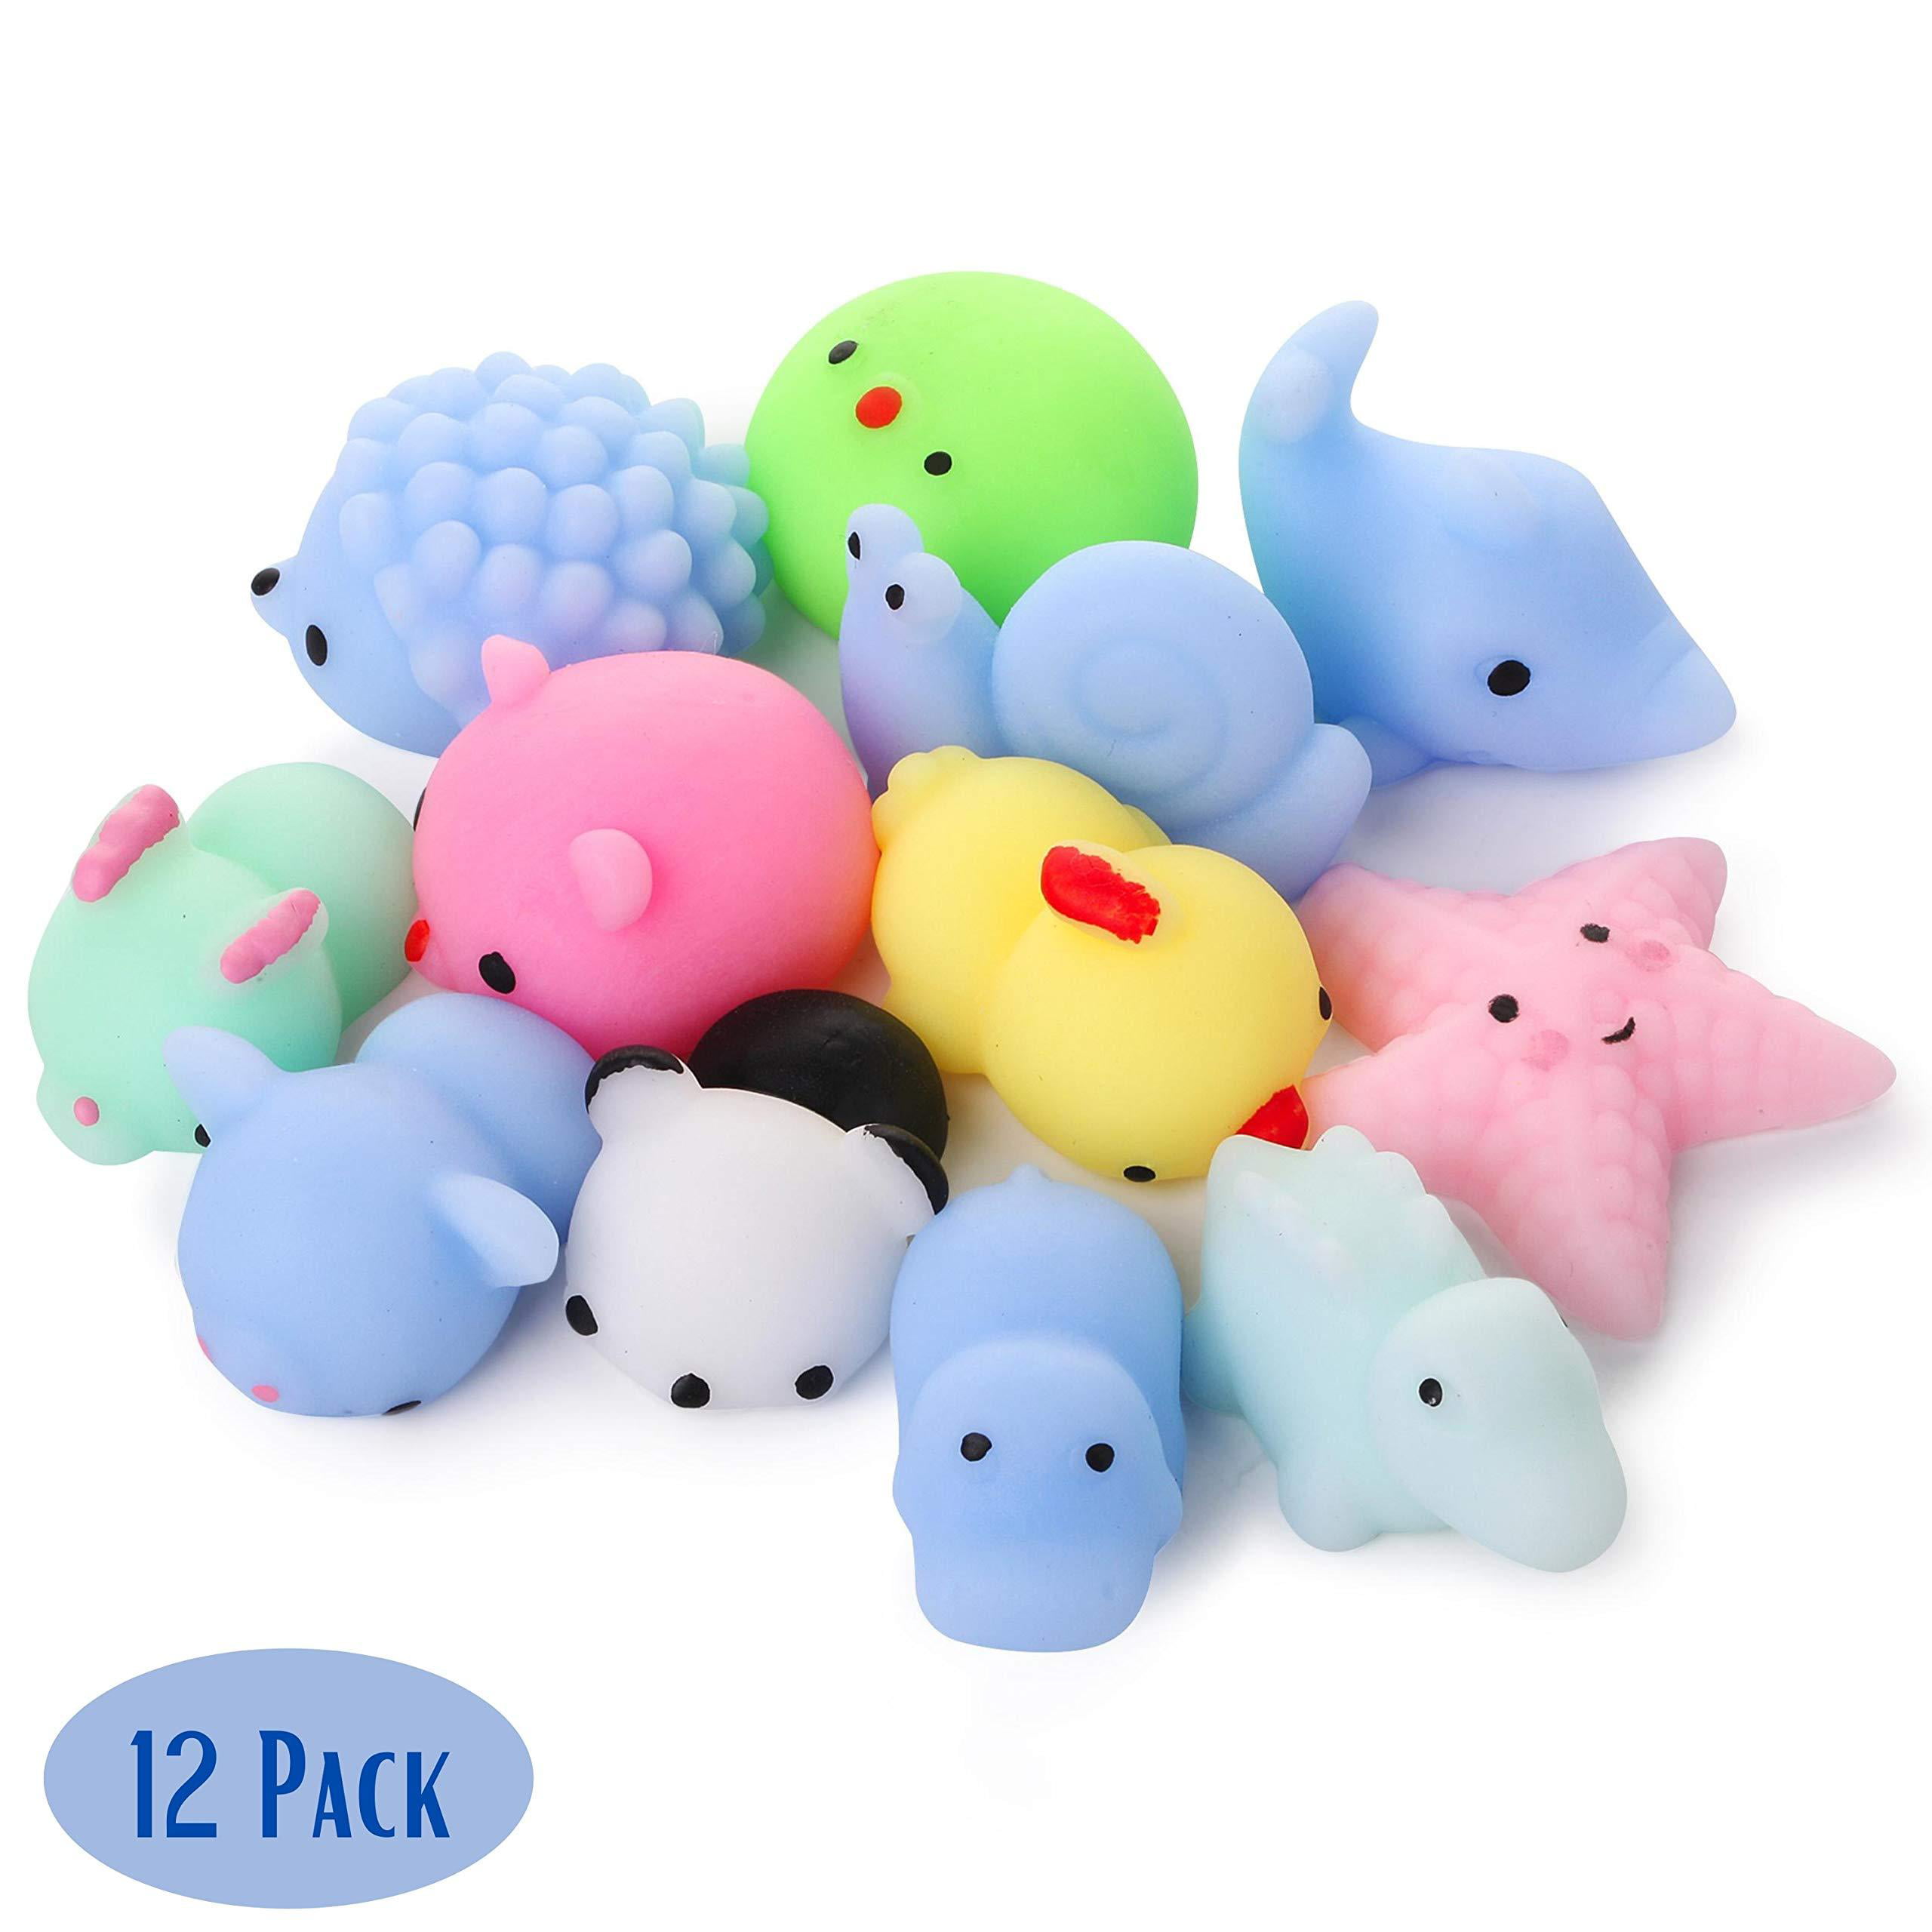 Mr. Pen- Squishy Toys, Pack, Squishy, Squishes for Kids, Squishy Toy, Squishy Pack, Squishy Animals - Walmart.com